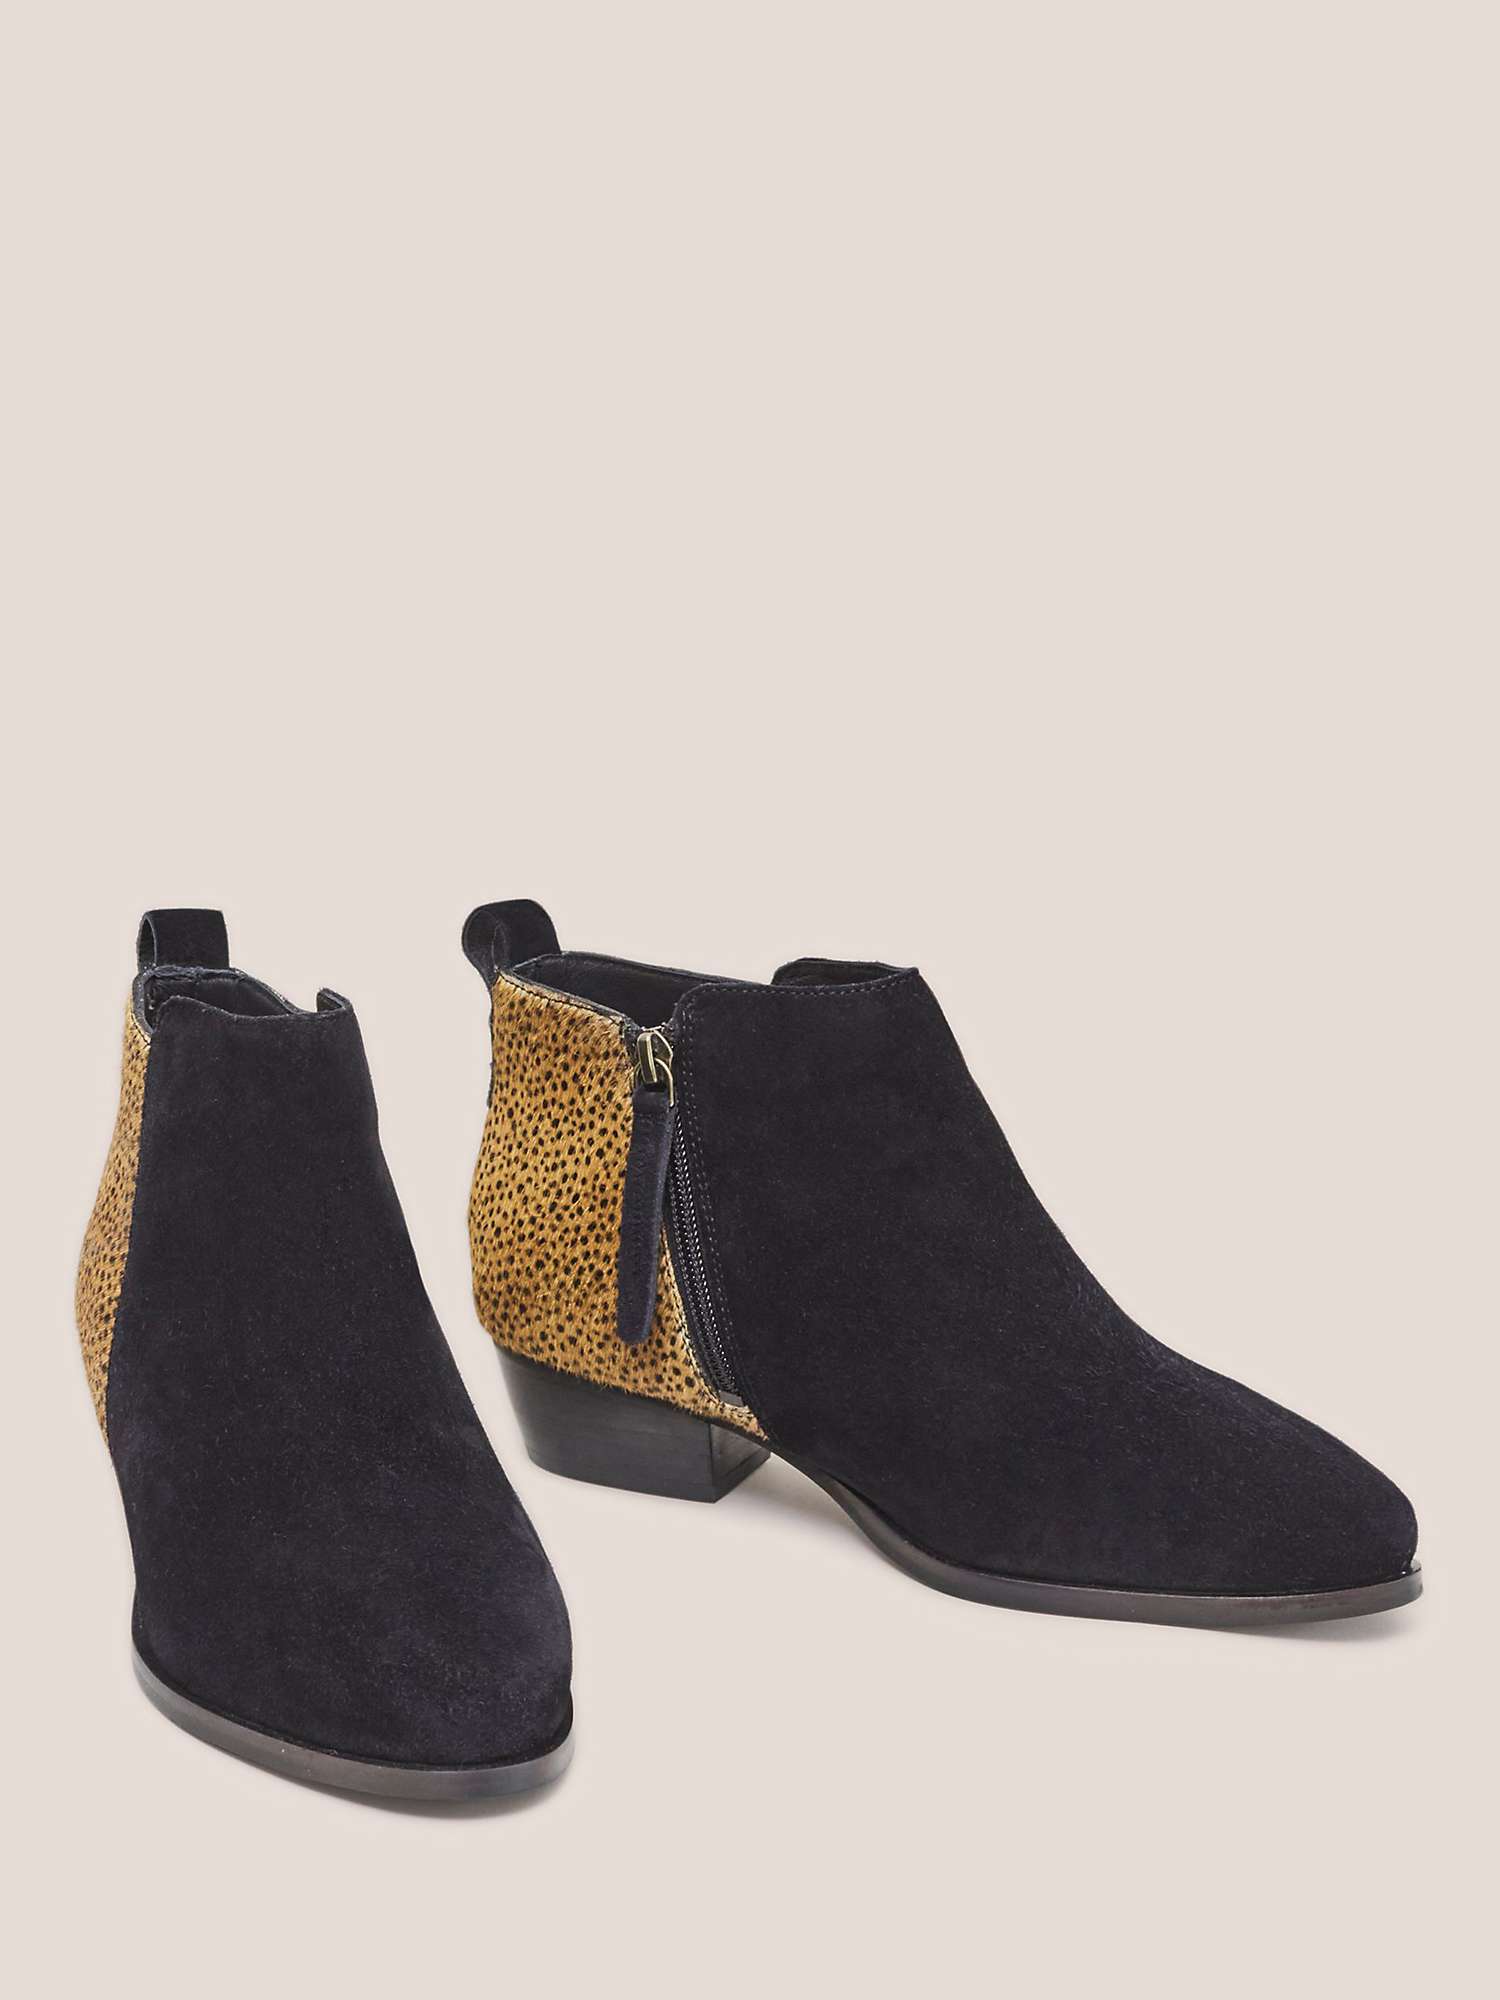 Buy White Stuff Willow Suede Pony Ankle Boots Online at johnlewis.com